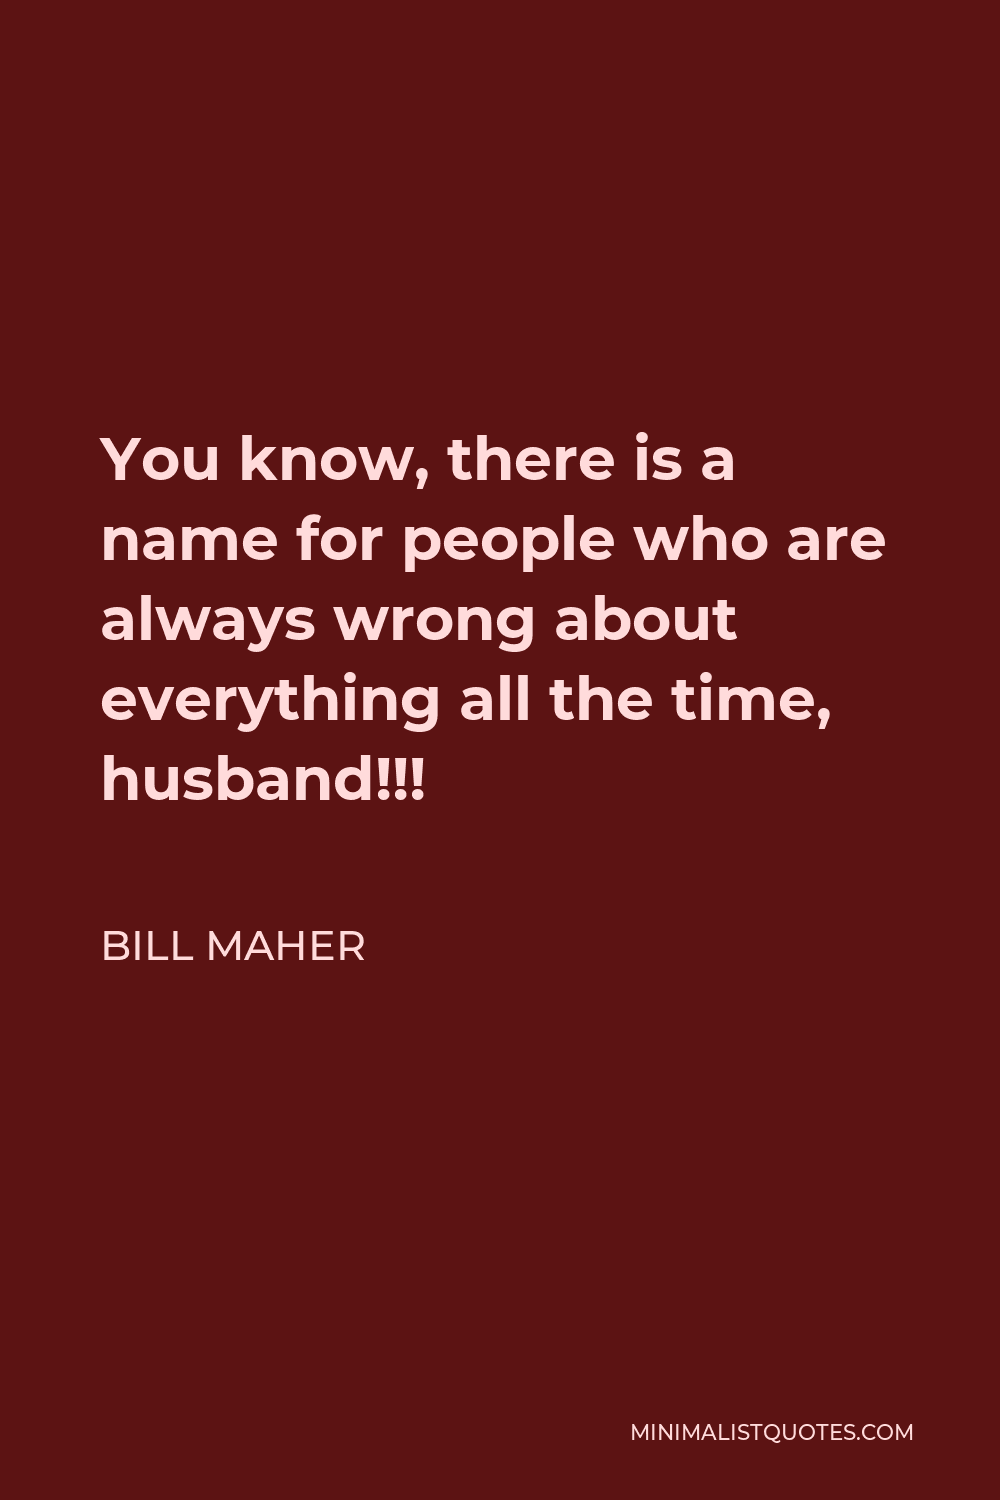 Bill Maher Quote - You know, there is a name for people who are always wrong about everything all the time, husband!!!